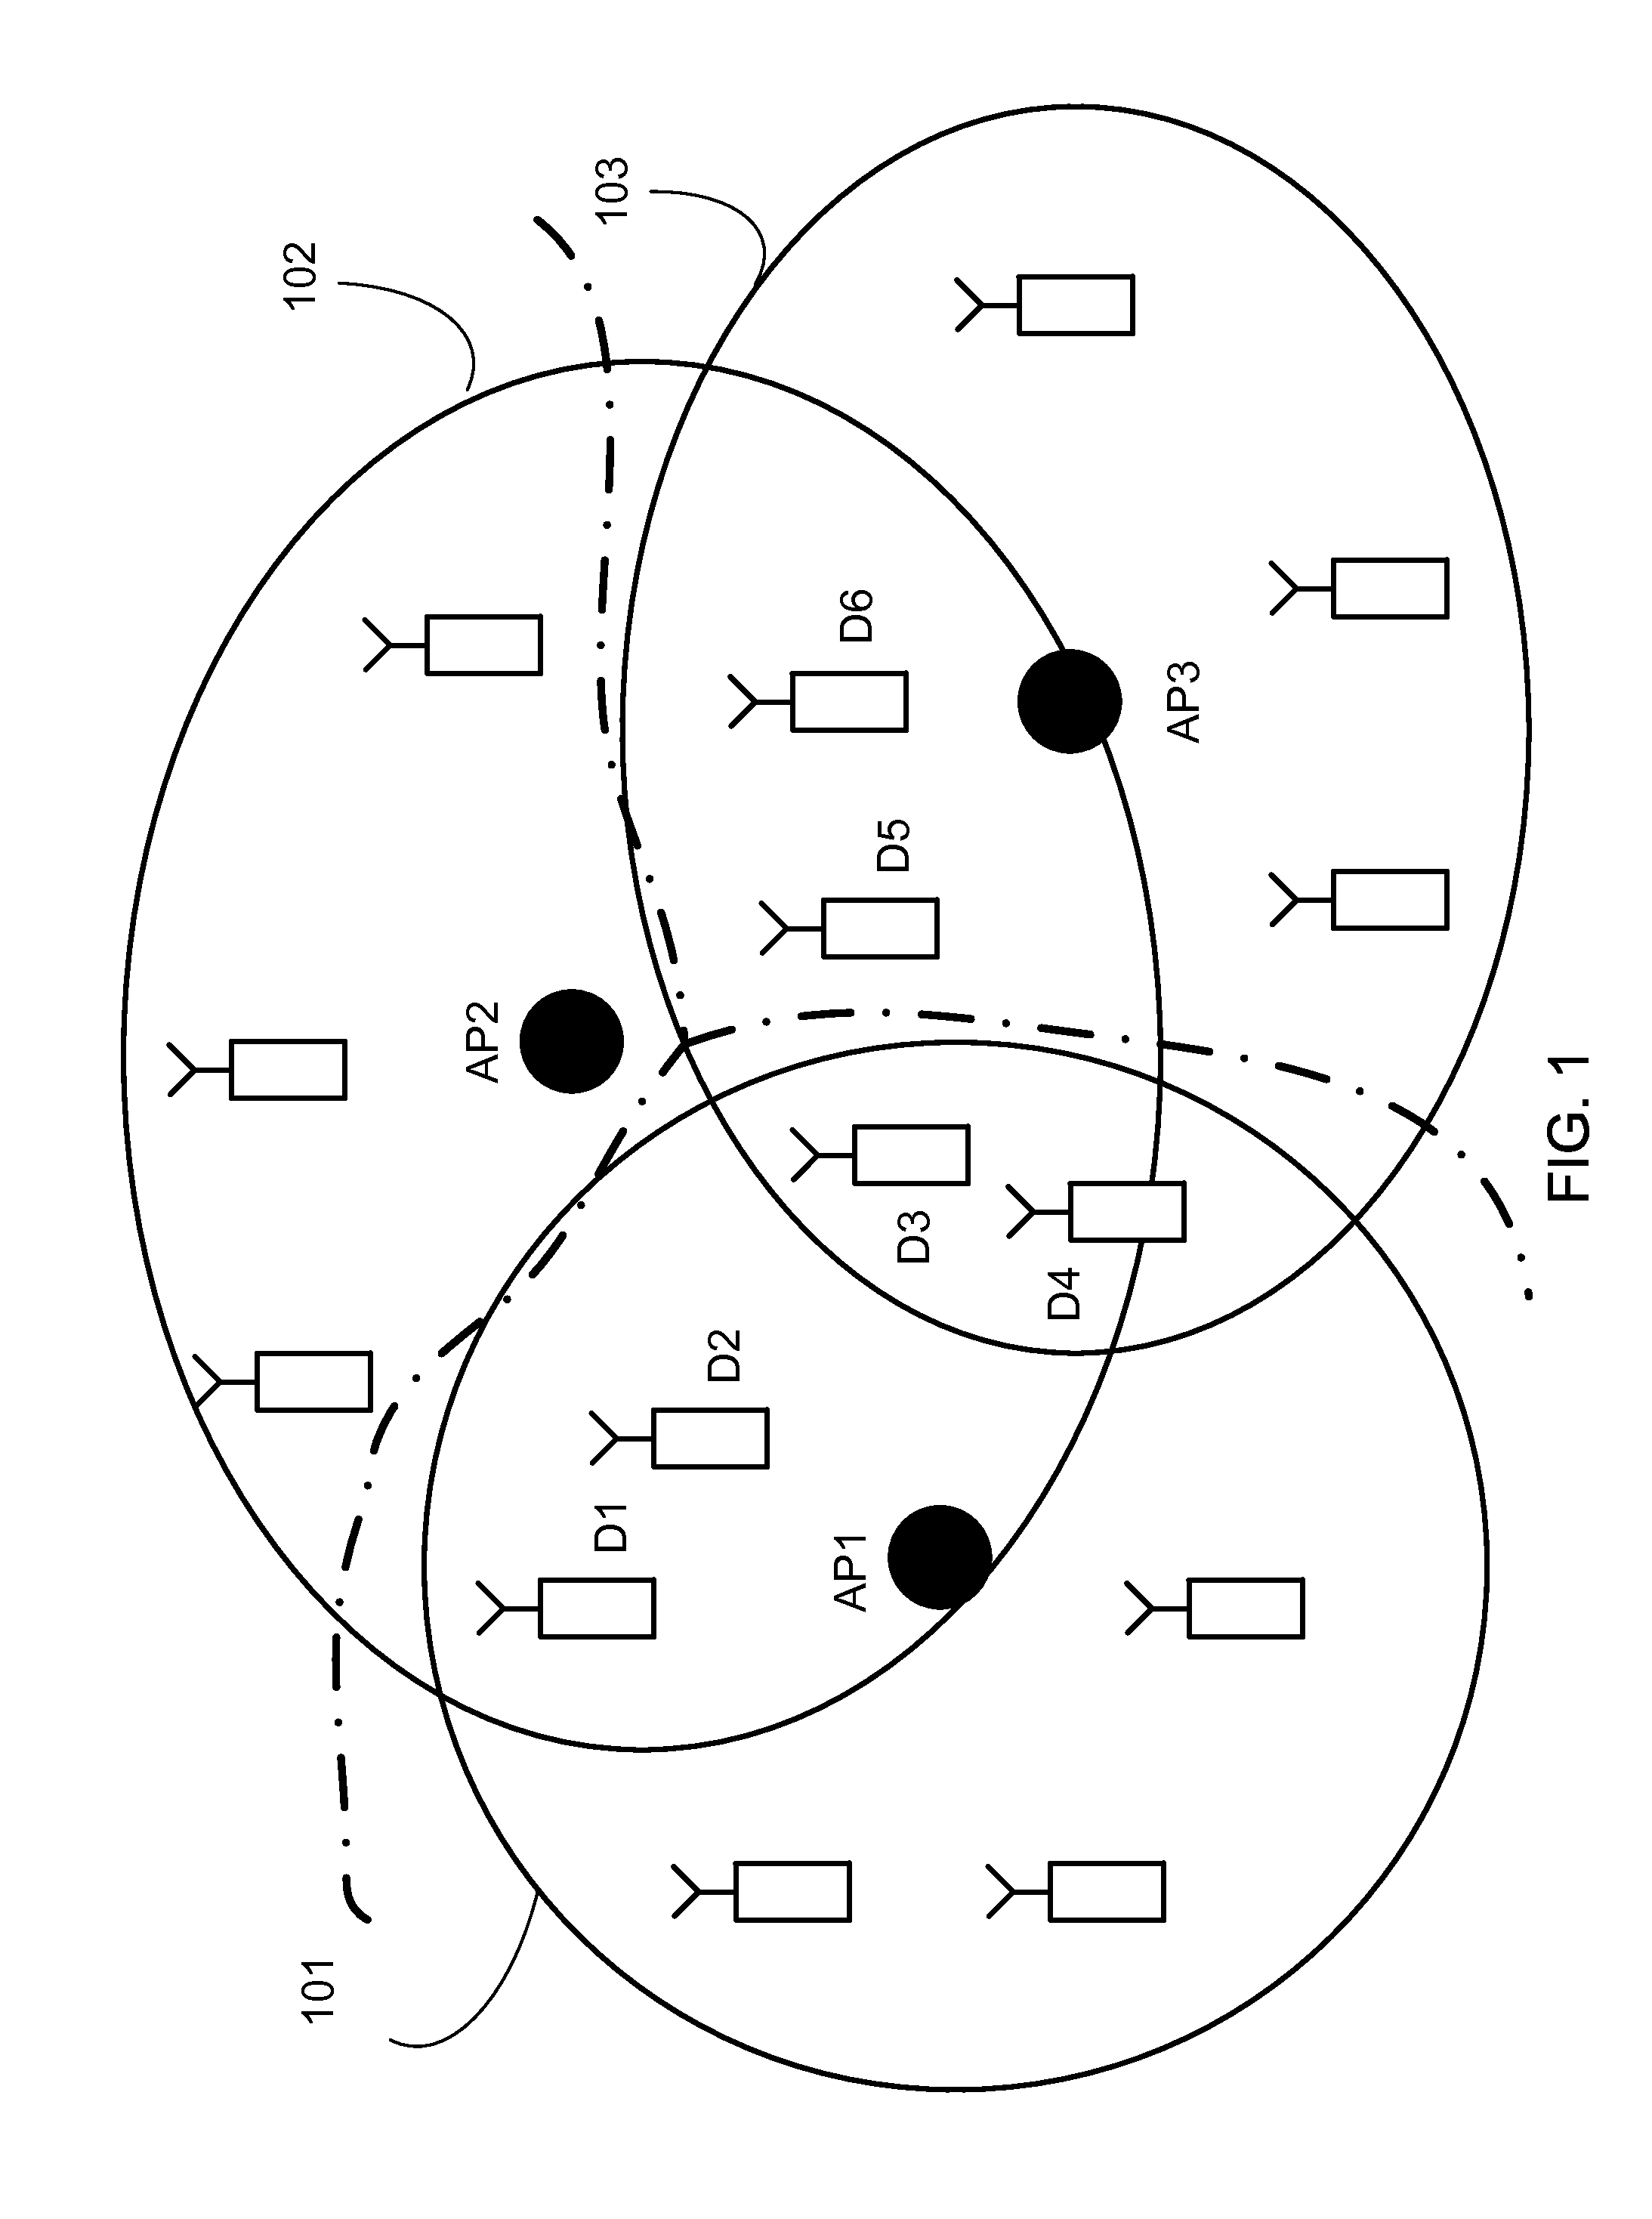 System and method for optimizing signal quality in a WIFI network